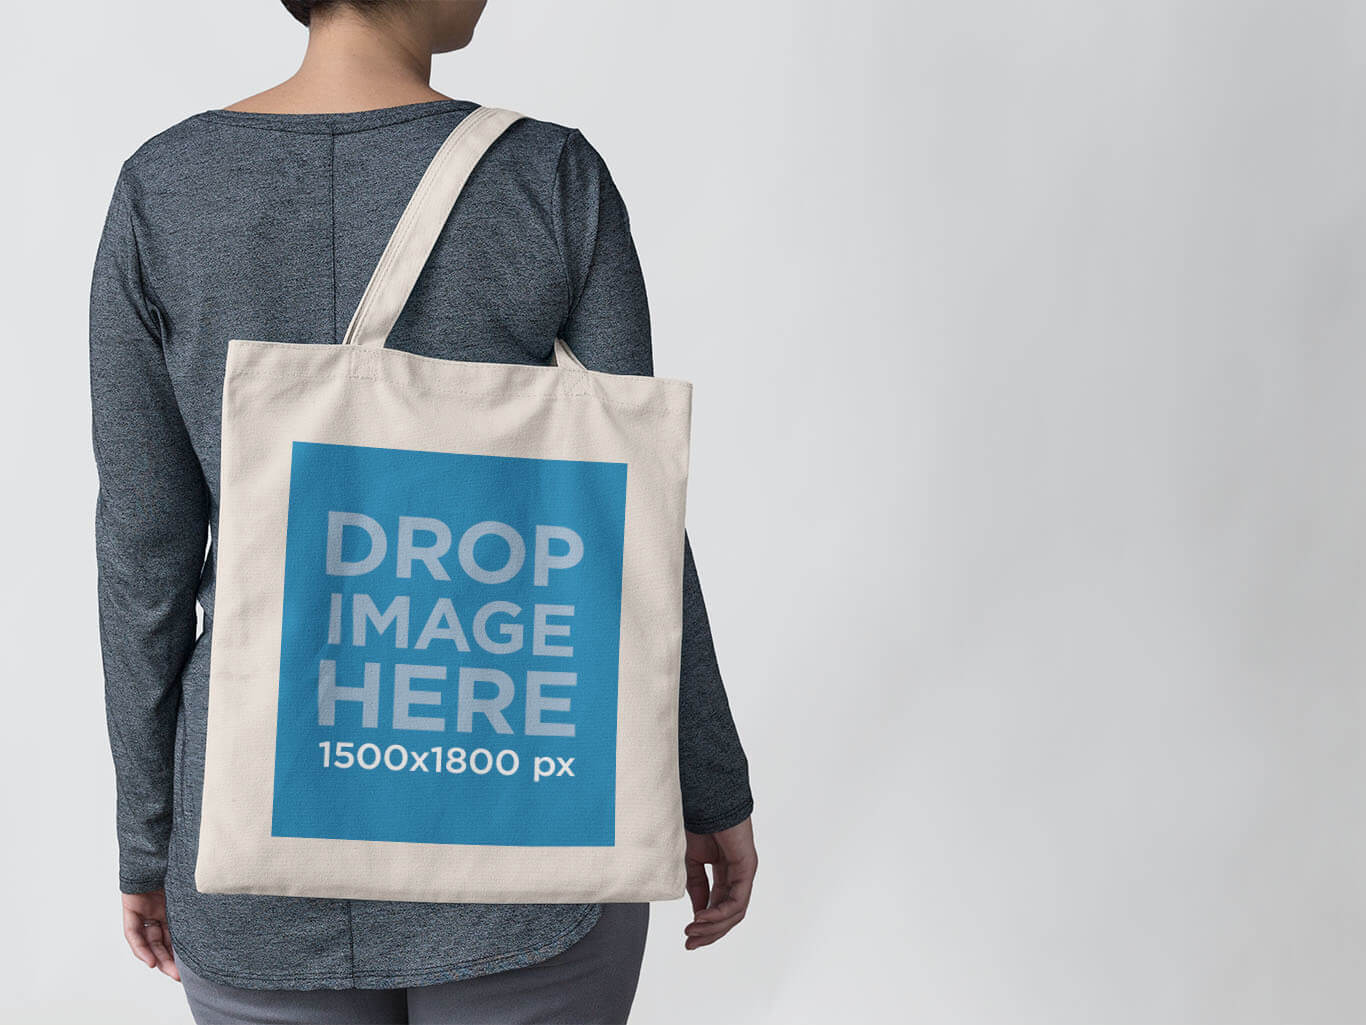 Download Promote Your Designs With Tote Bag Mockups | Placeit